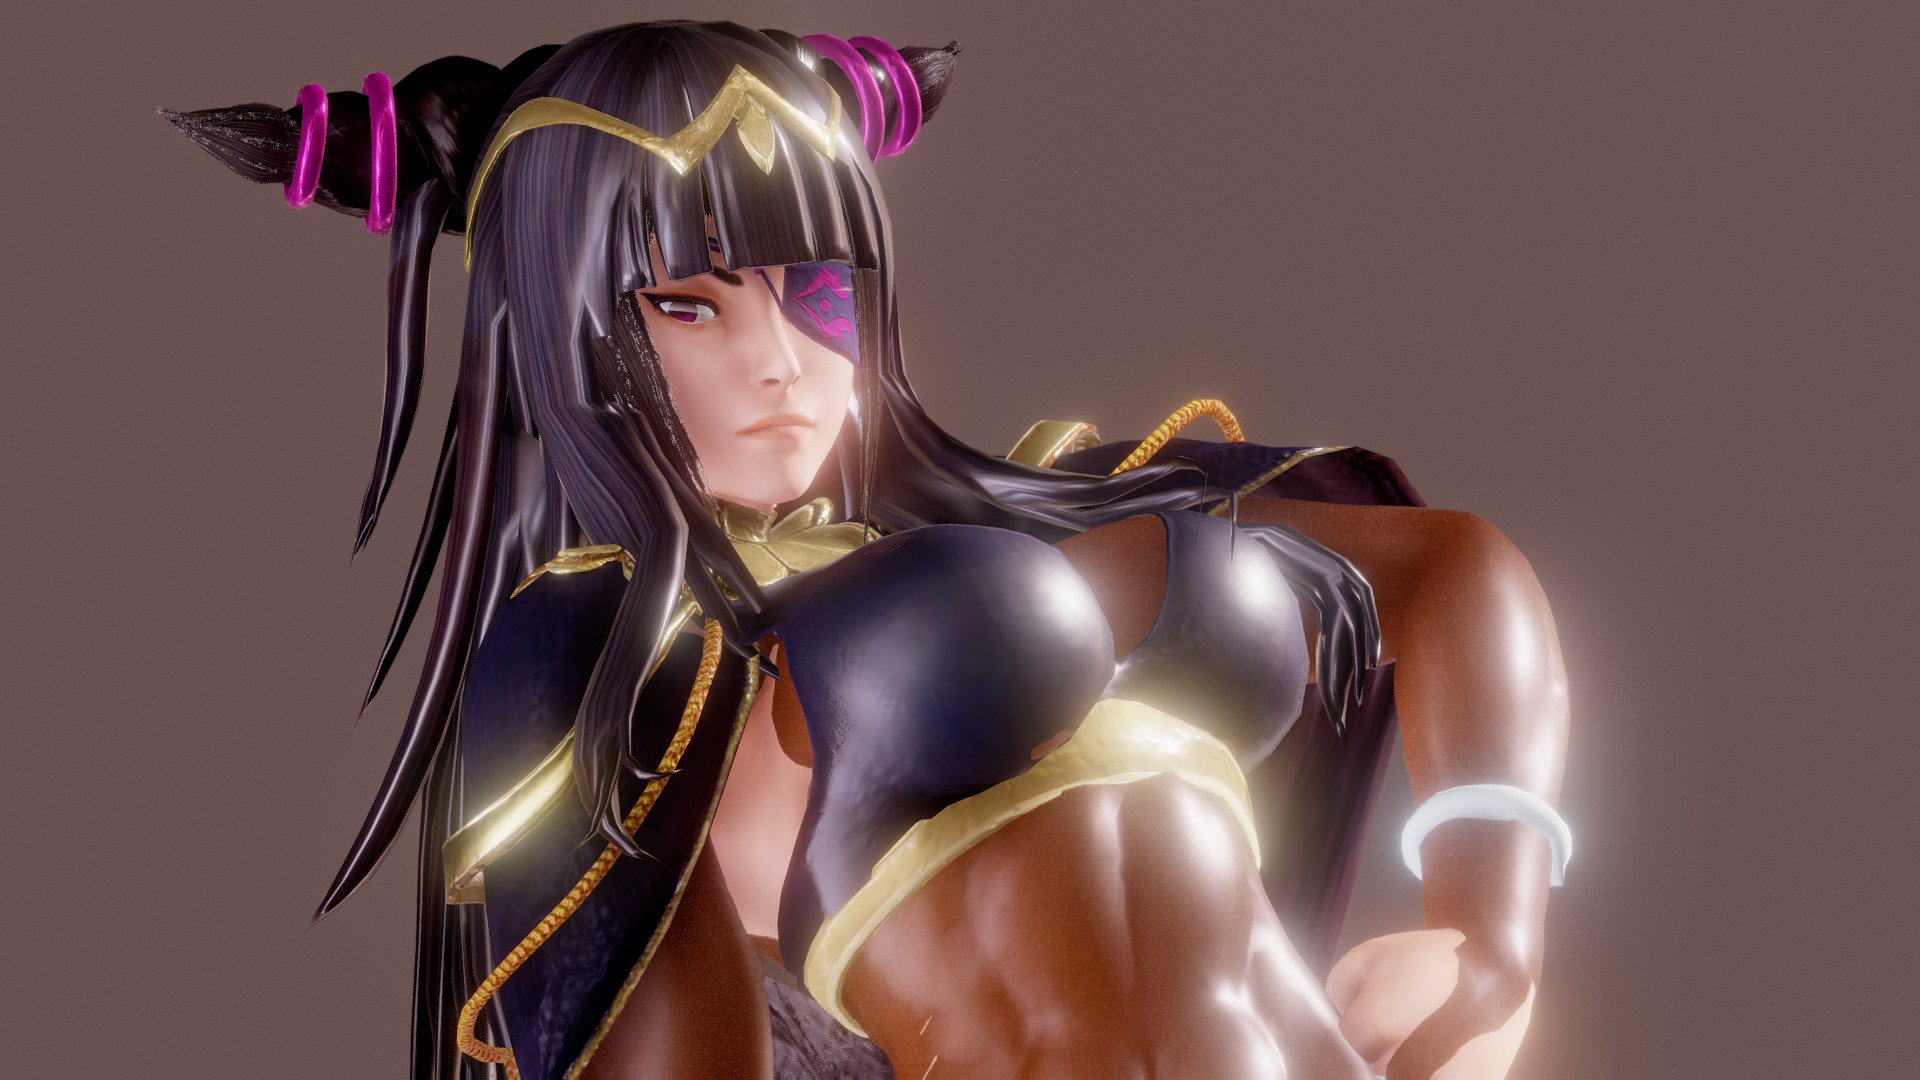 Juri Han from Street Fighter V cosplaying Tharja from Fire Emblem. Strange? Good? Average? Tell me what you think!

Format: FBX

Patron Me: https://www.patreon.com/marcelievsky

For commissions - 3d human models rigged with materials to be used on BLENDER (.blend) or games (.fbx)
marcelievsky@gmail.com - Juri Han as Tharja (Cosplay) - 3D model by marcelievsky 3d model